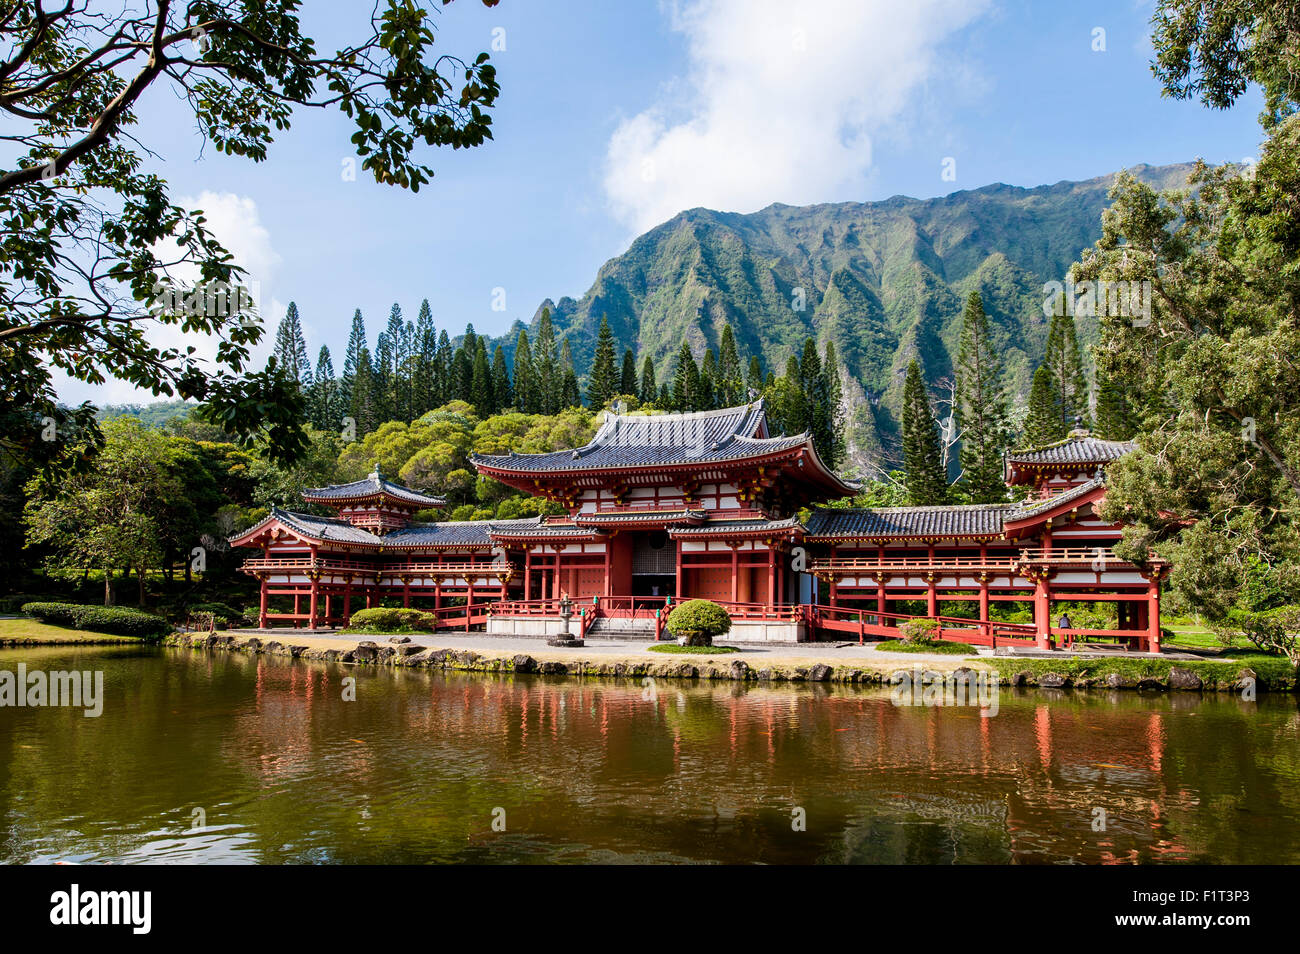 Byodo-In Temple, Valley of The Temples, Kaneohe, Oahu, Hawaii, United States of America, Pacific Stock Photo